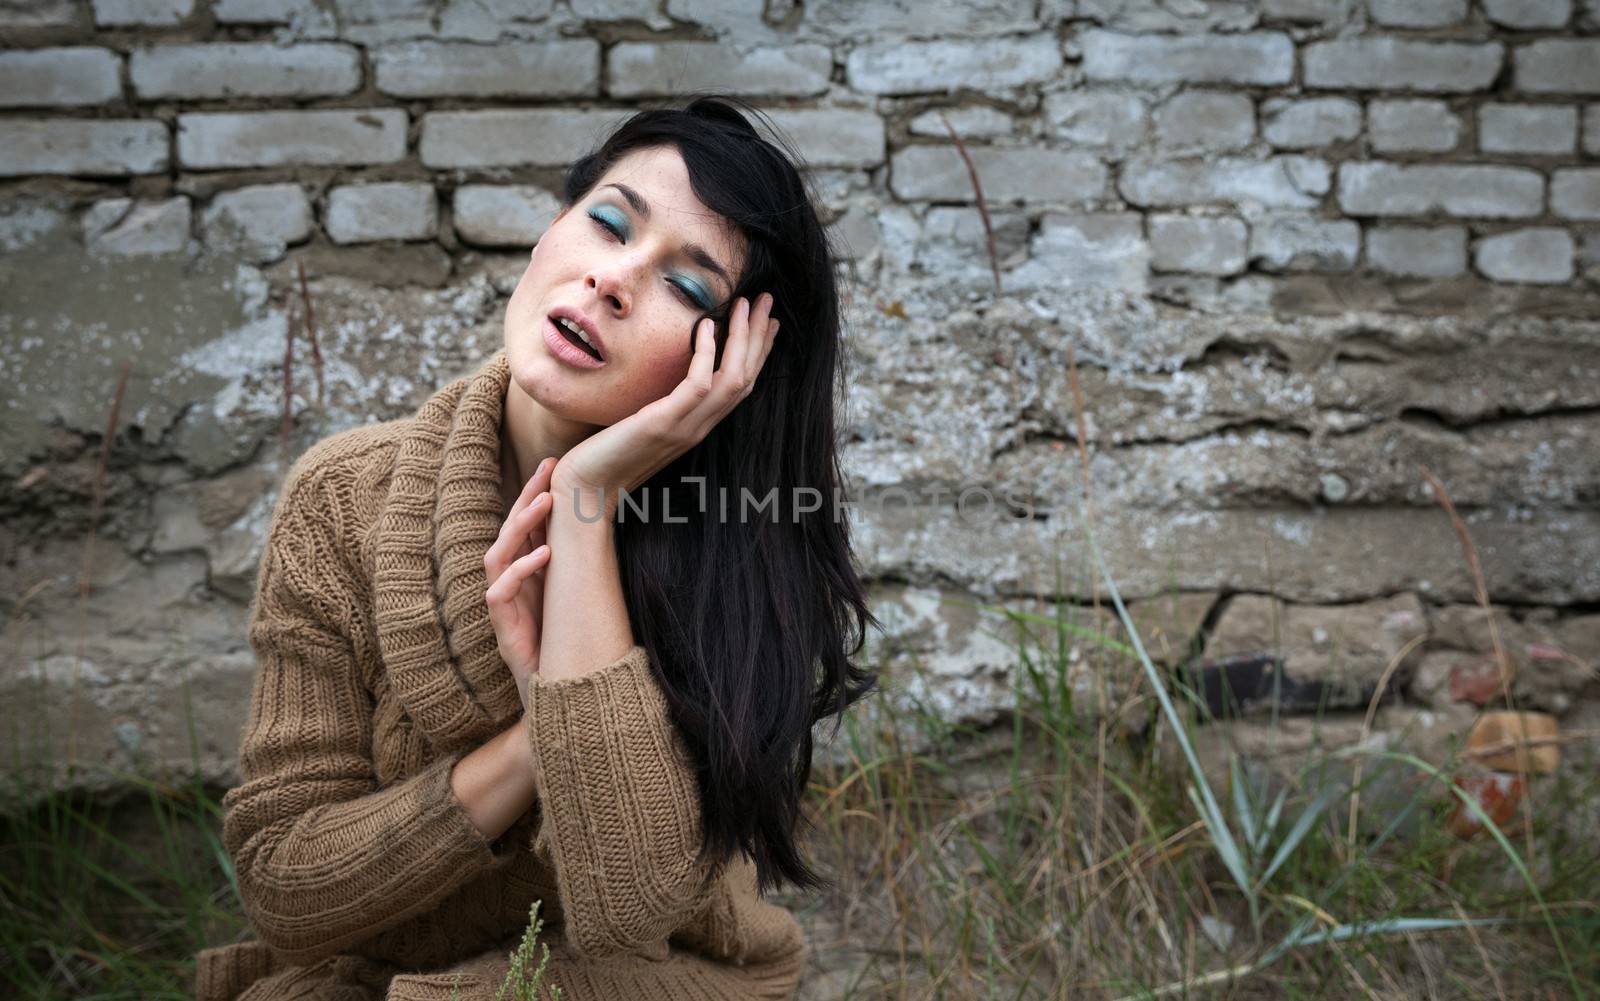 Portrait of a girl with closed eyes against old brick wall